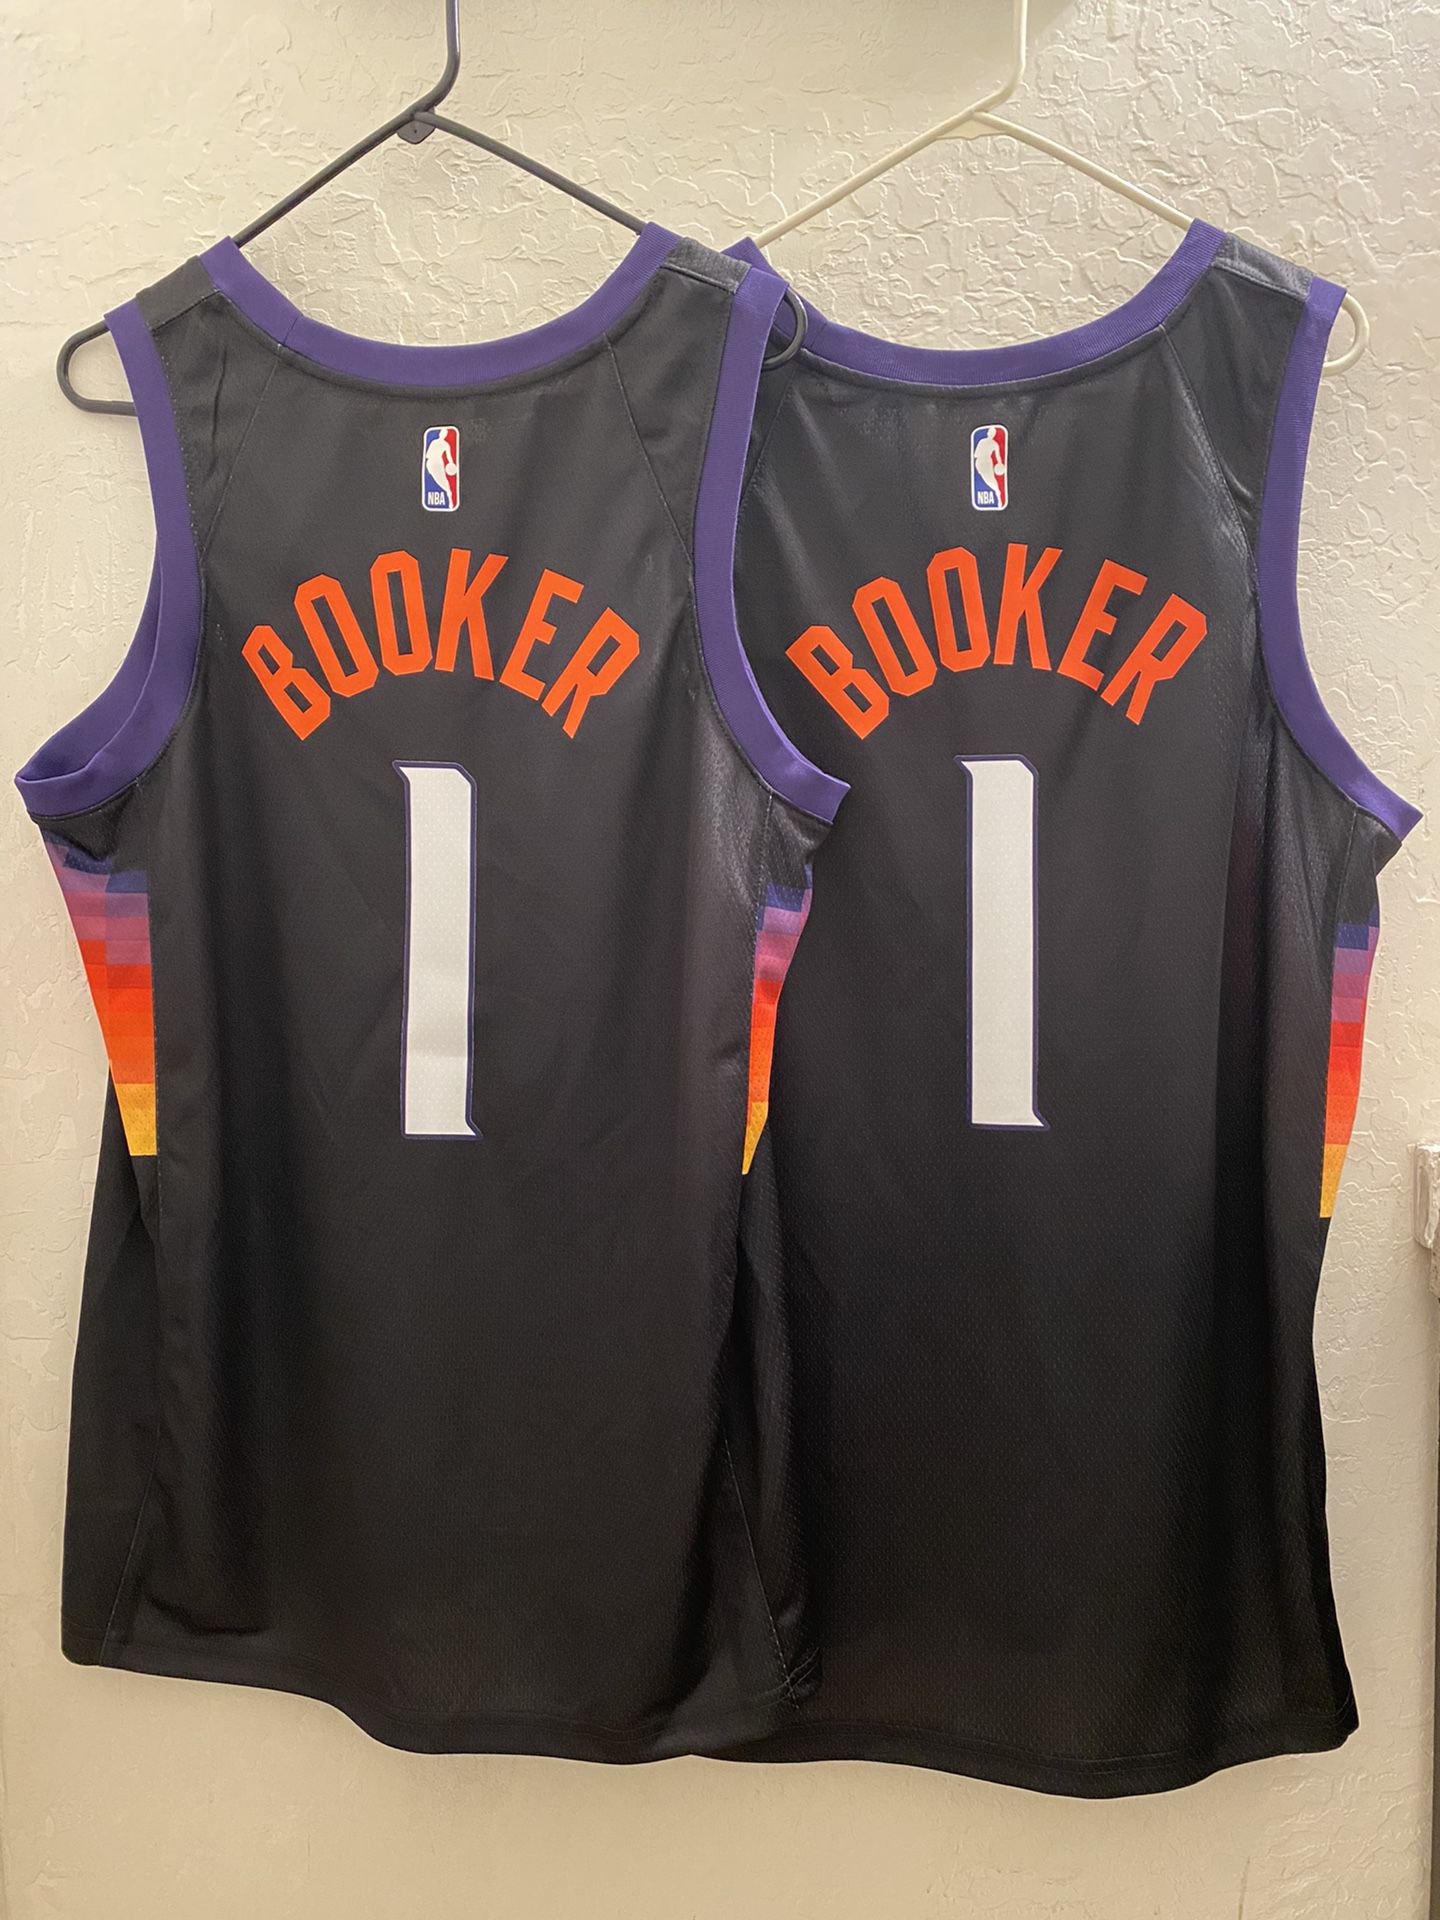 The Sims Resource - NBA Phoenix Suns The Valley Jersey